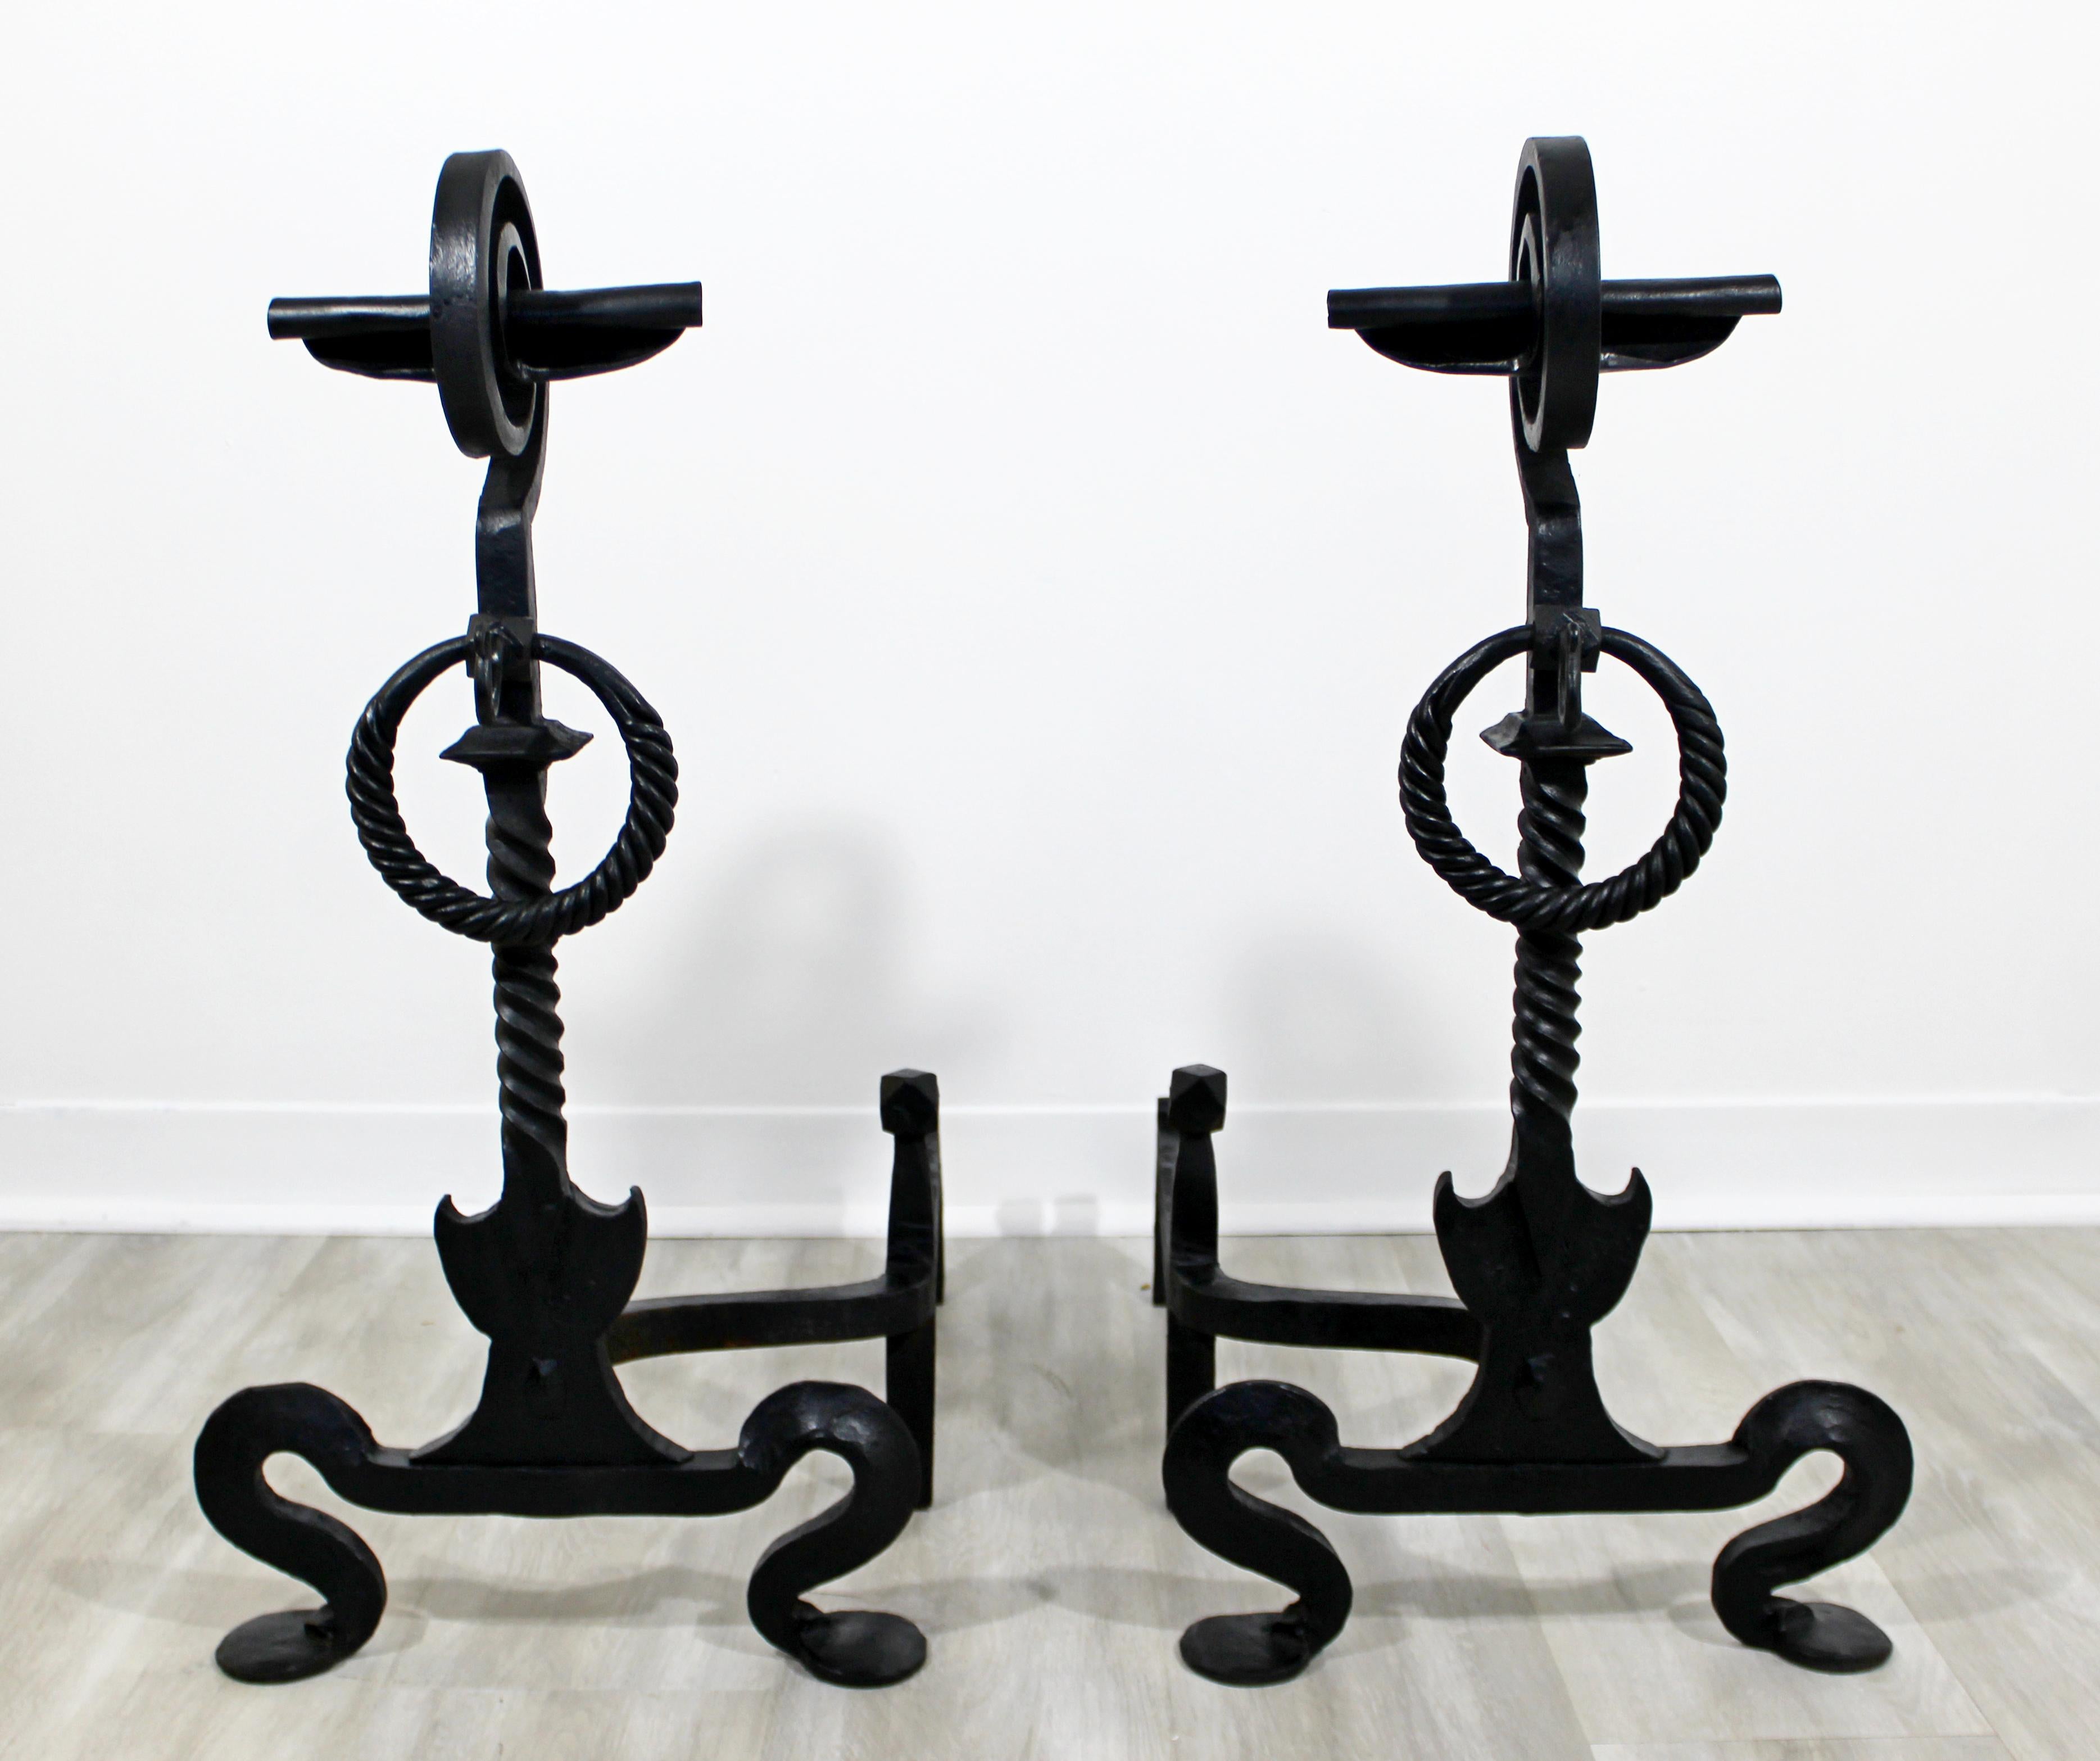 For your consideration is a stunning pair of intricate and heavy blacksmith hand forged andirons, circa 1960s. In excellent condition. The dimensions of each are 14